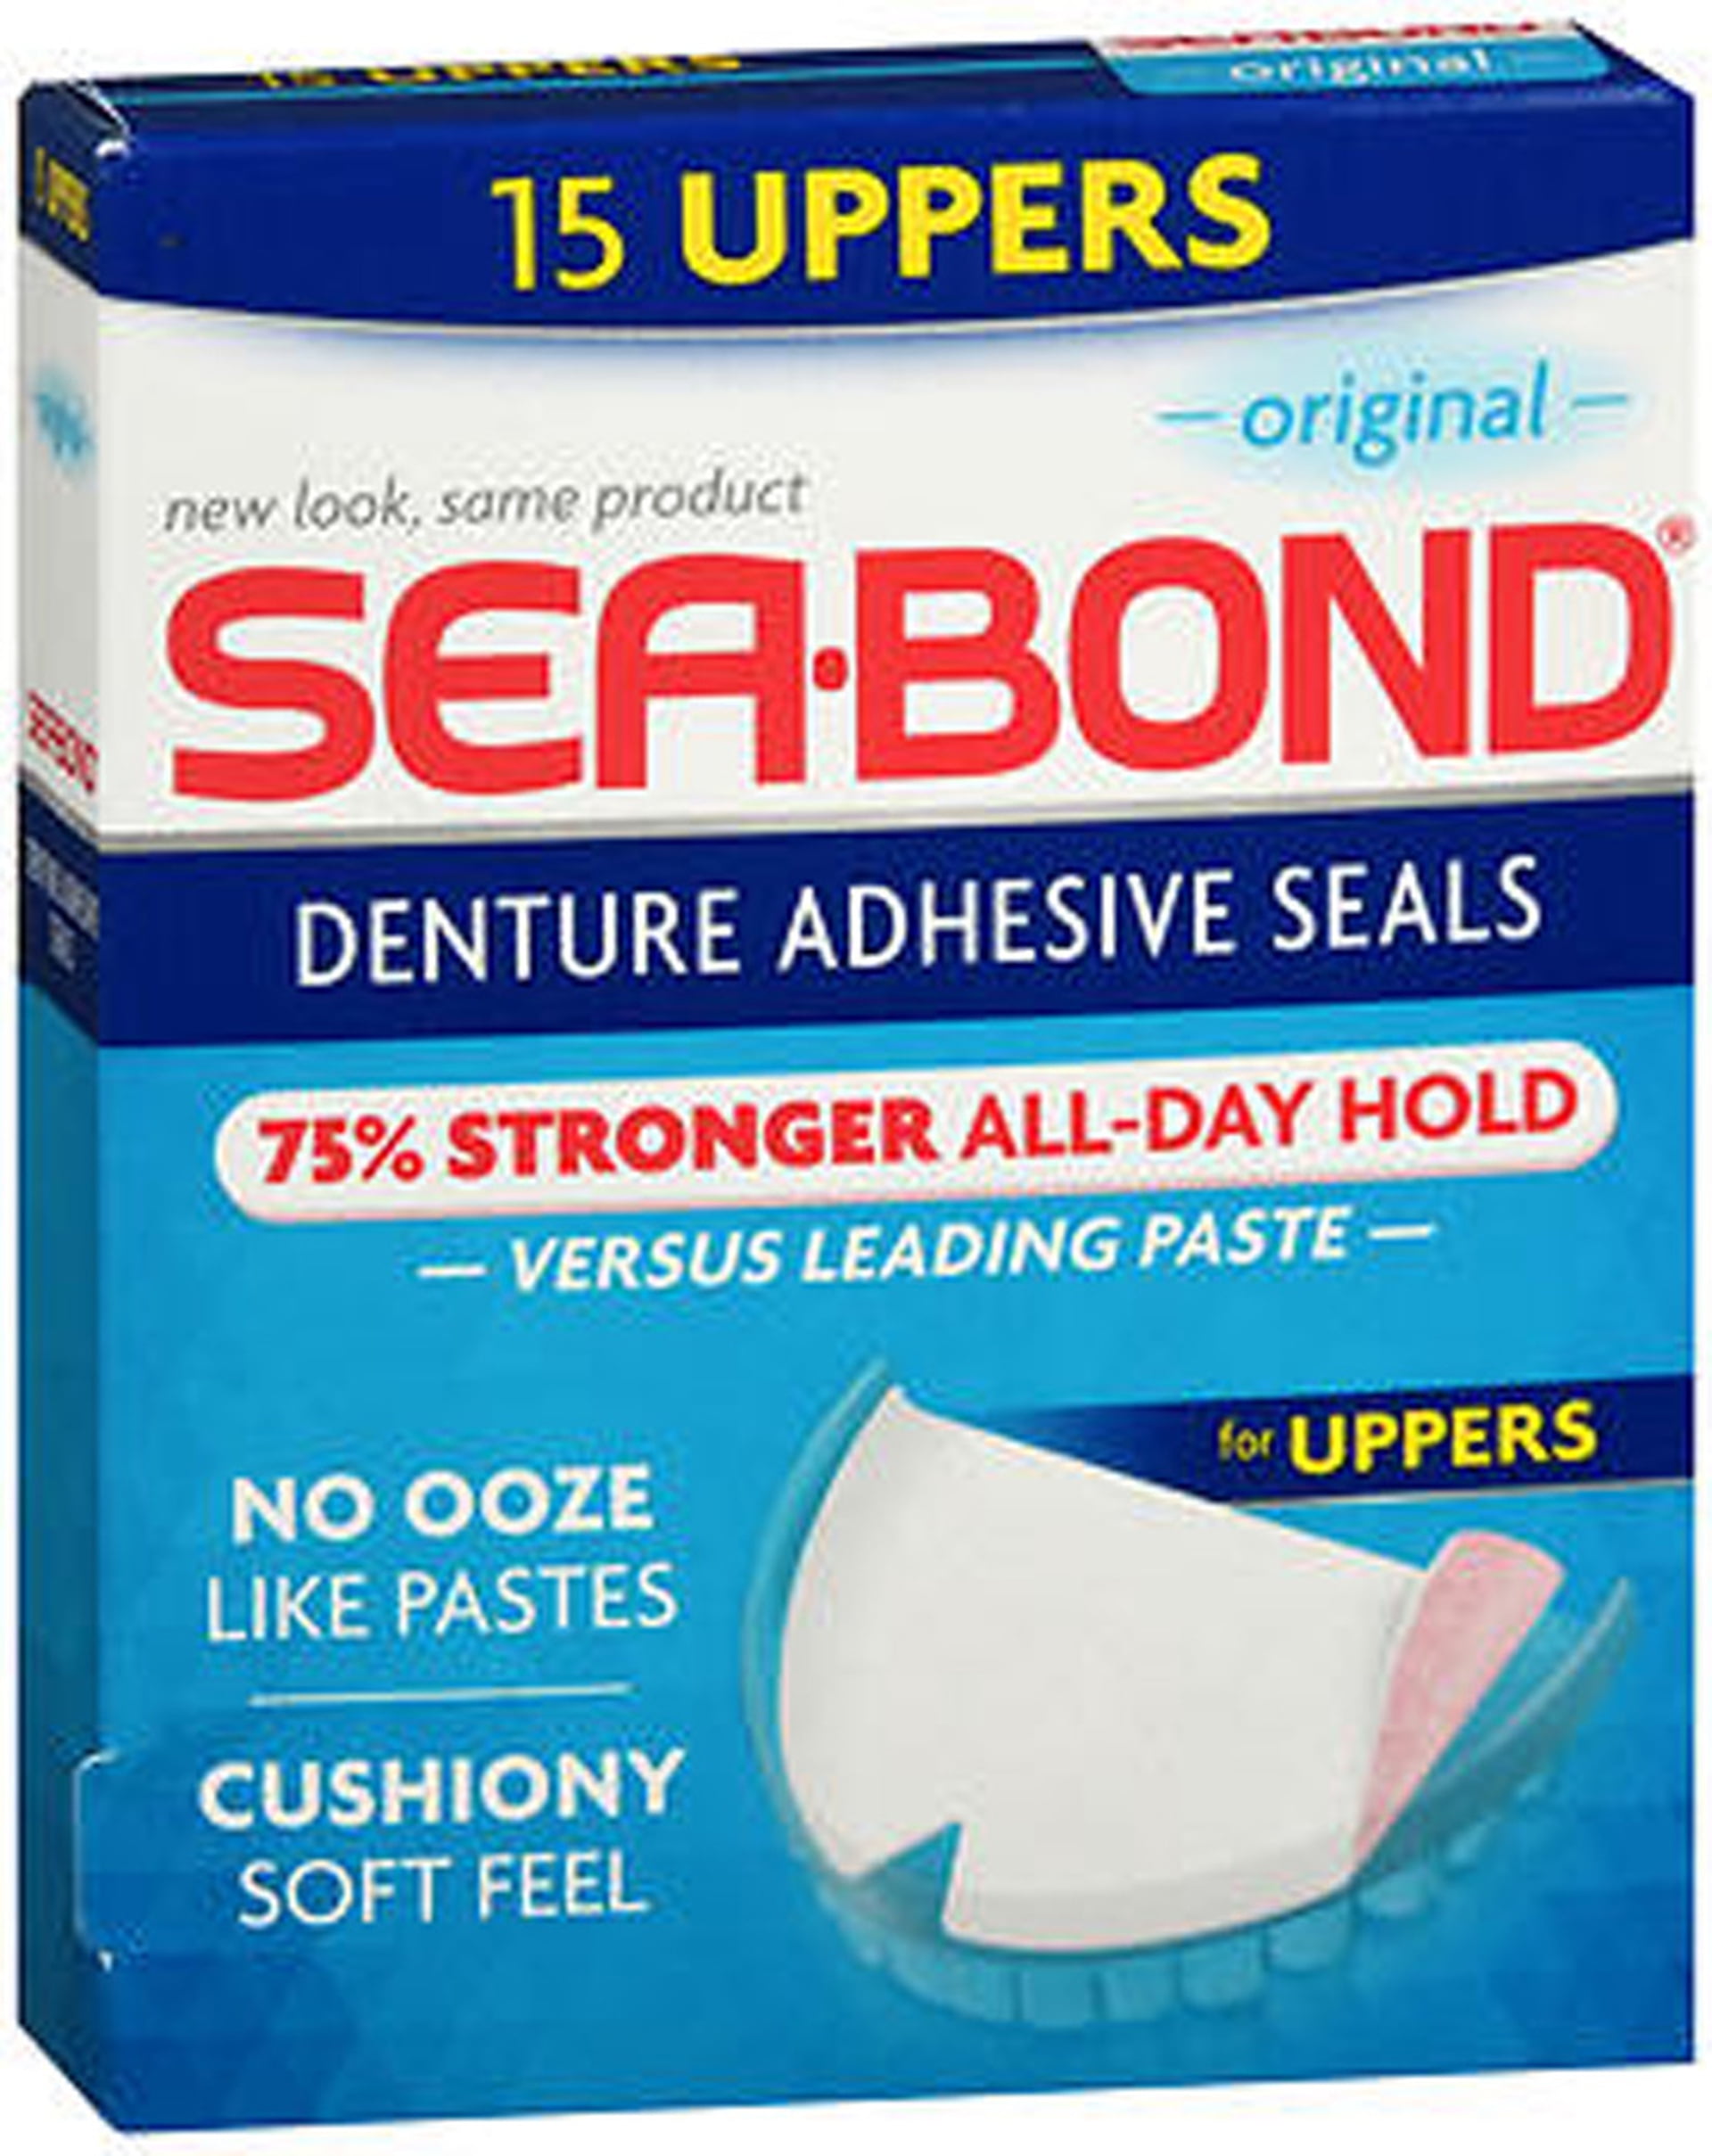 Sea Bond Lower Secure Denture Adhesive Seals, For an All Day Strong Hold,  Original Flavor Seals, 30 Count 